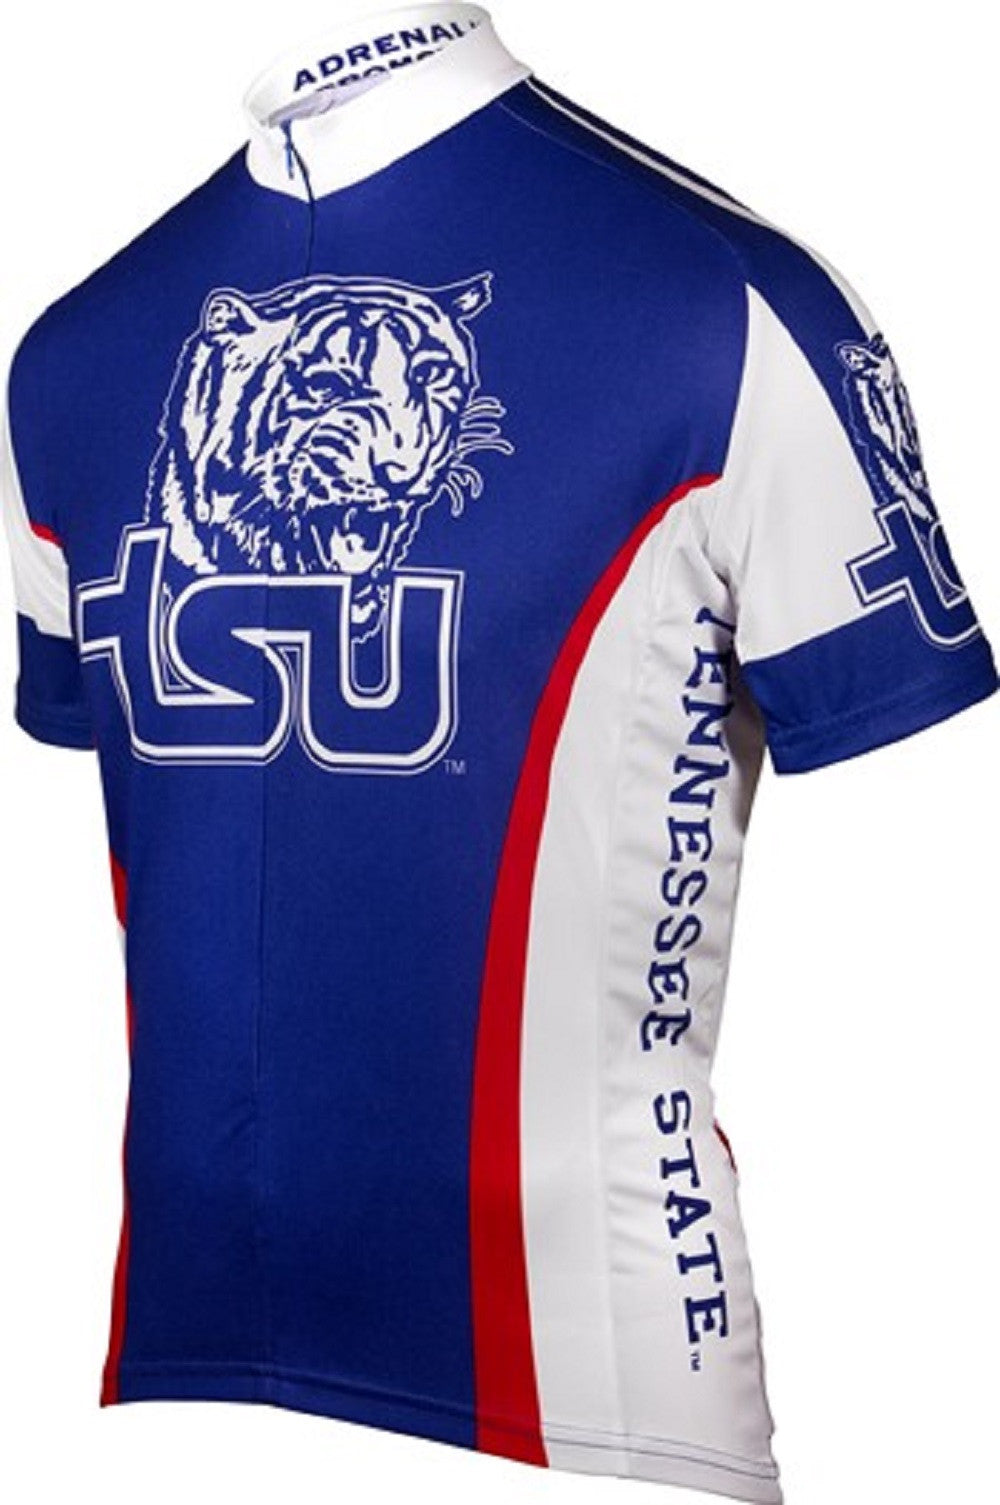 Tennessee State Men's Cycling Jersey (S, M)